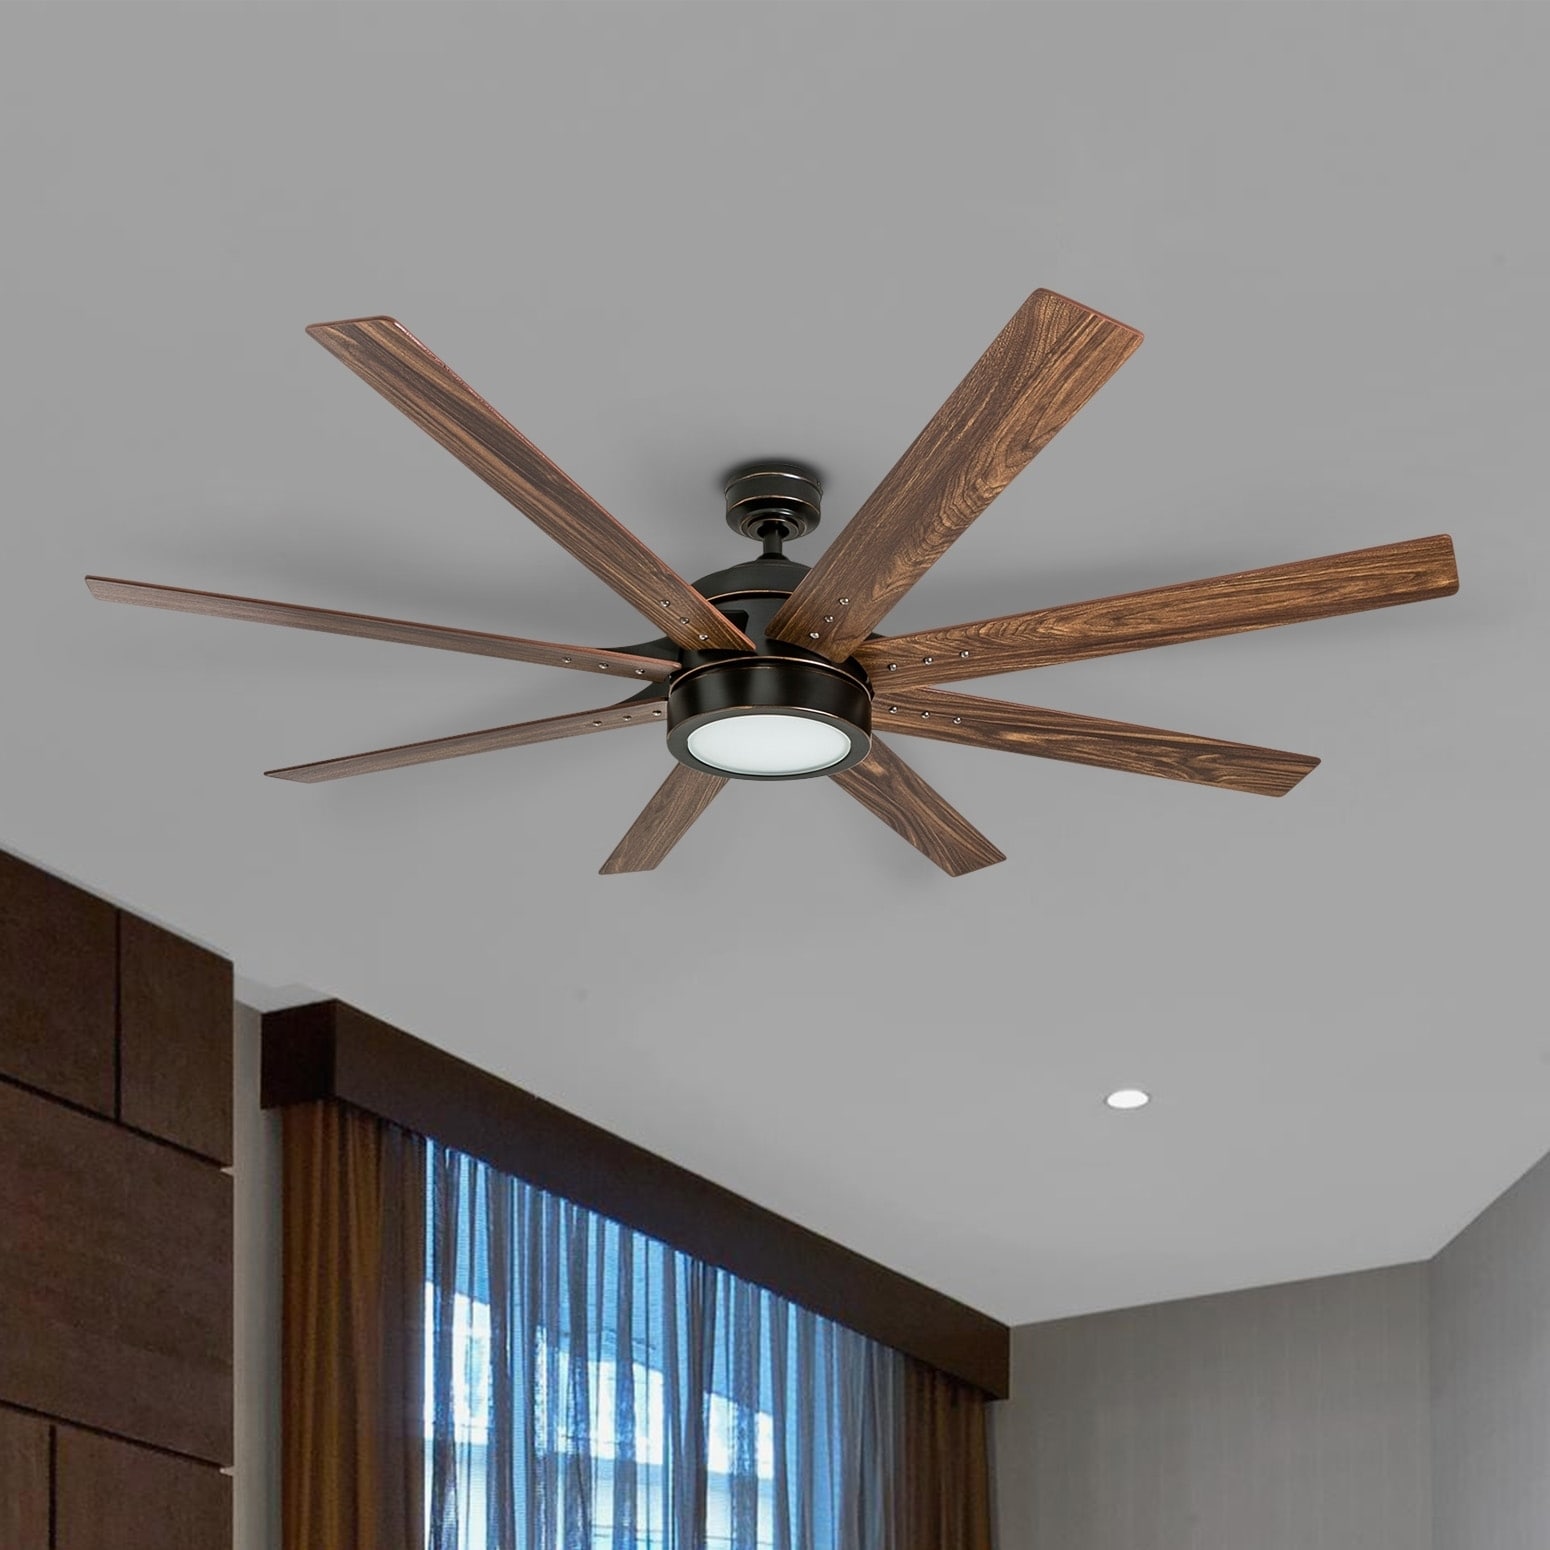 Honeywell Xerxes Oil Rubbed Bronze Led Remote Control Ceiling Fan 8 Blade Integrated Light 62 Inch